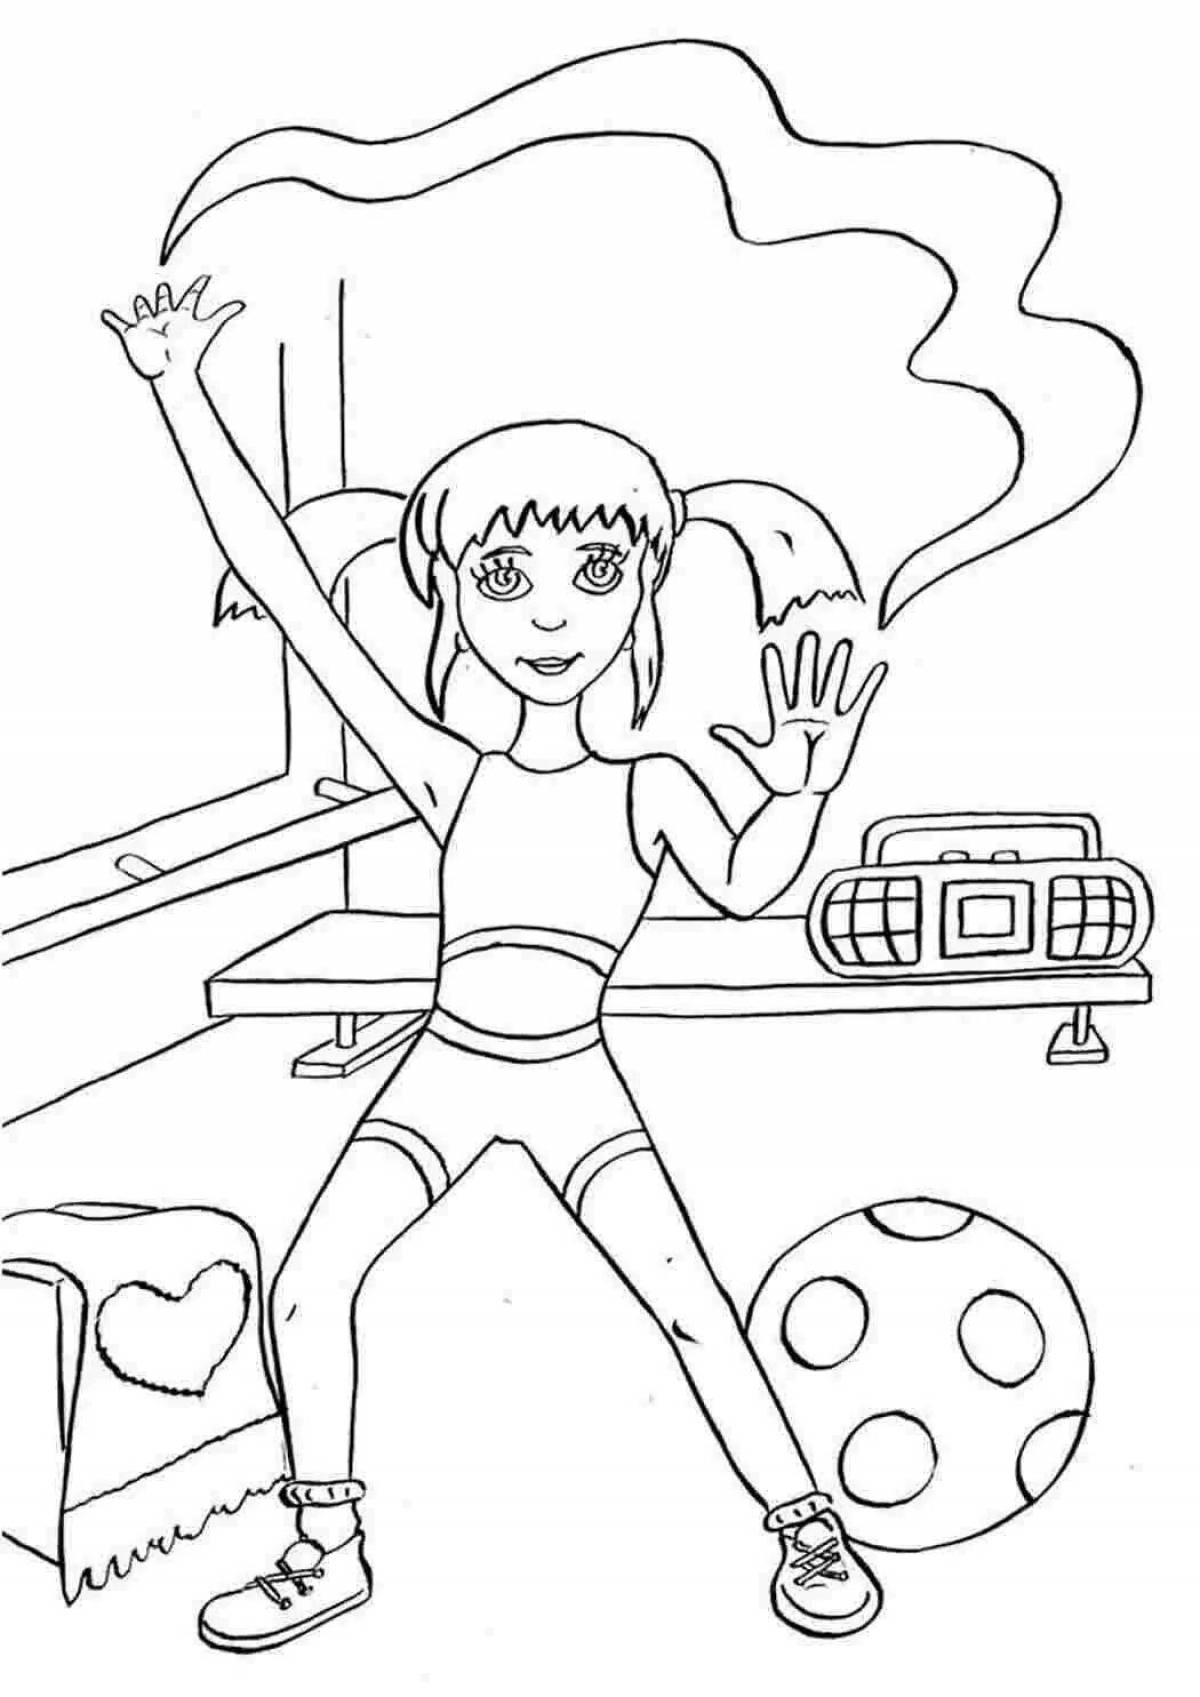 Colorful sport and healthy lifestyle coloring page